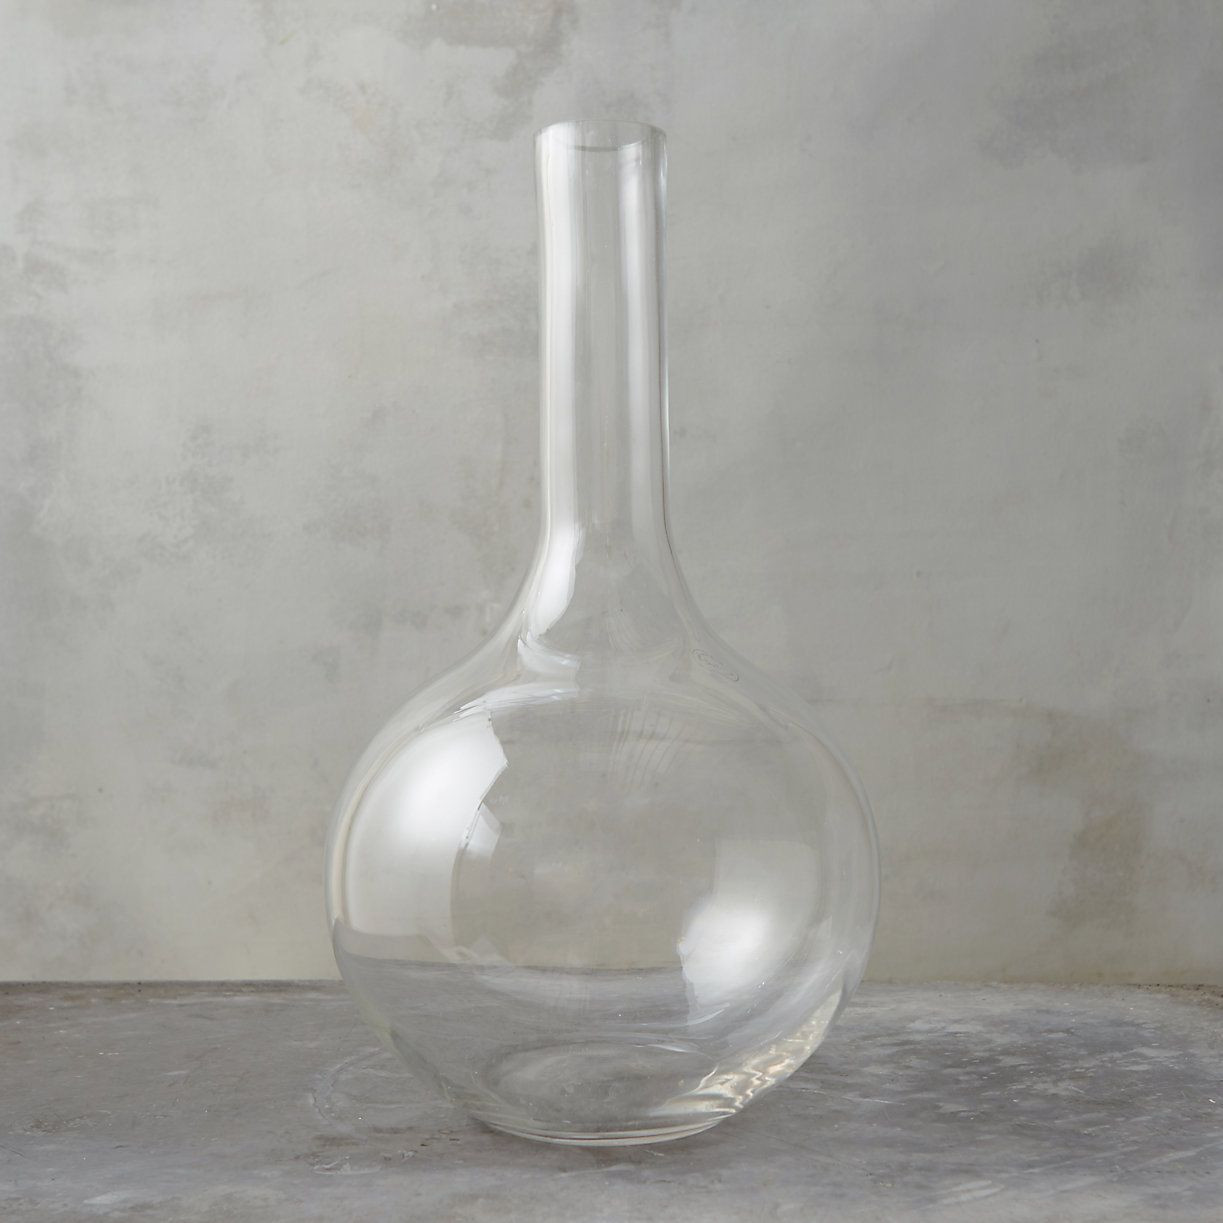 24 Fantastic Square Glass Vase Set 2024 free download square glass vase set of glass single stem vase kitchen dining area pinterest dining intended for this glass vase with its elegant and understated shape allows a single flower or faux branch